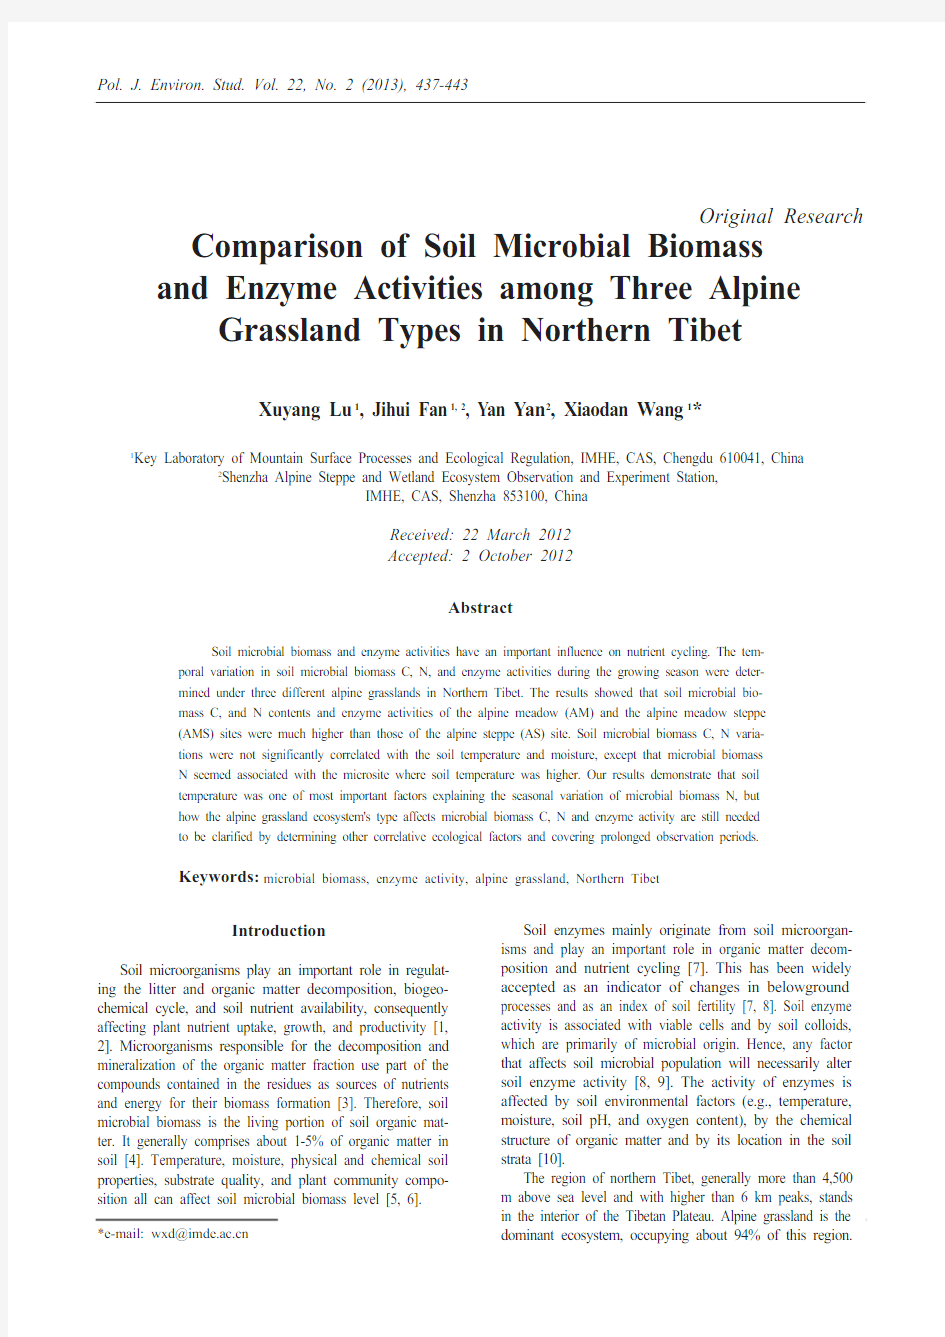 Comparison of Soil Microbial Biomass and Enzyme Activities among Three Alpine Grassland